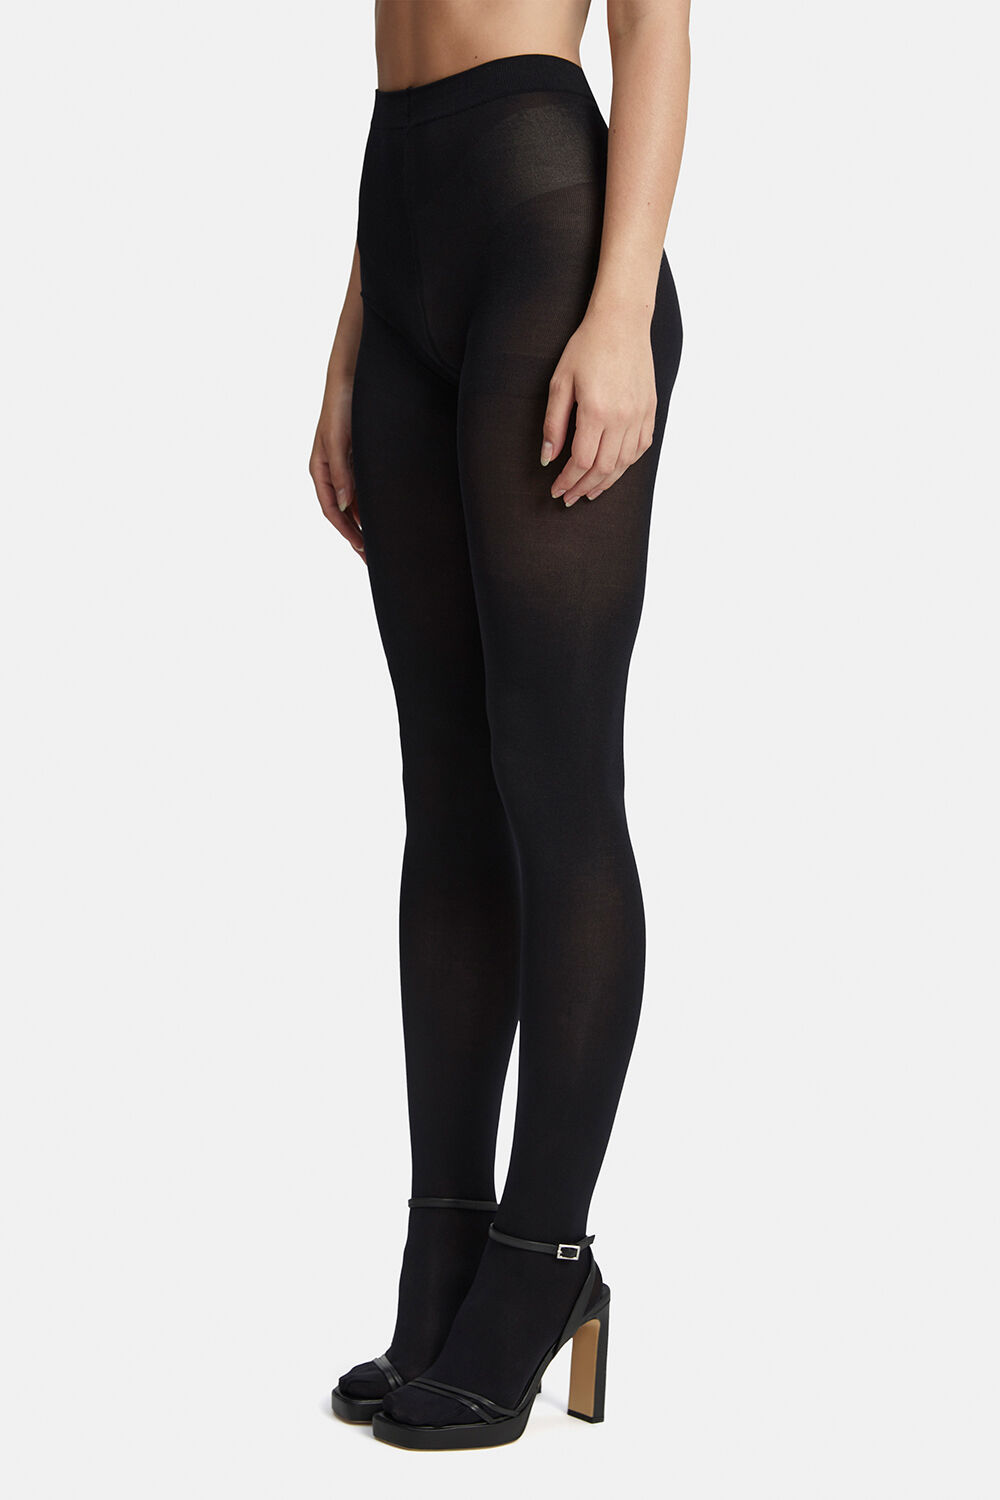 OPAQUE TIGHTS in colour METEORITE